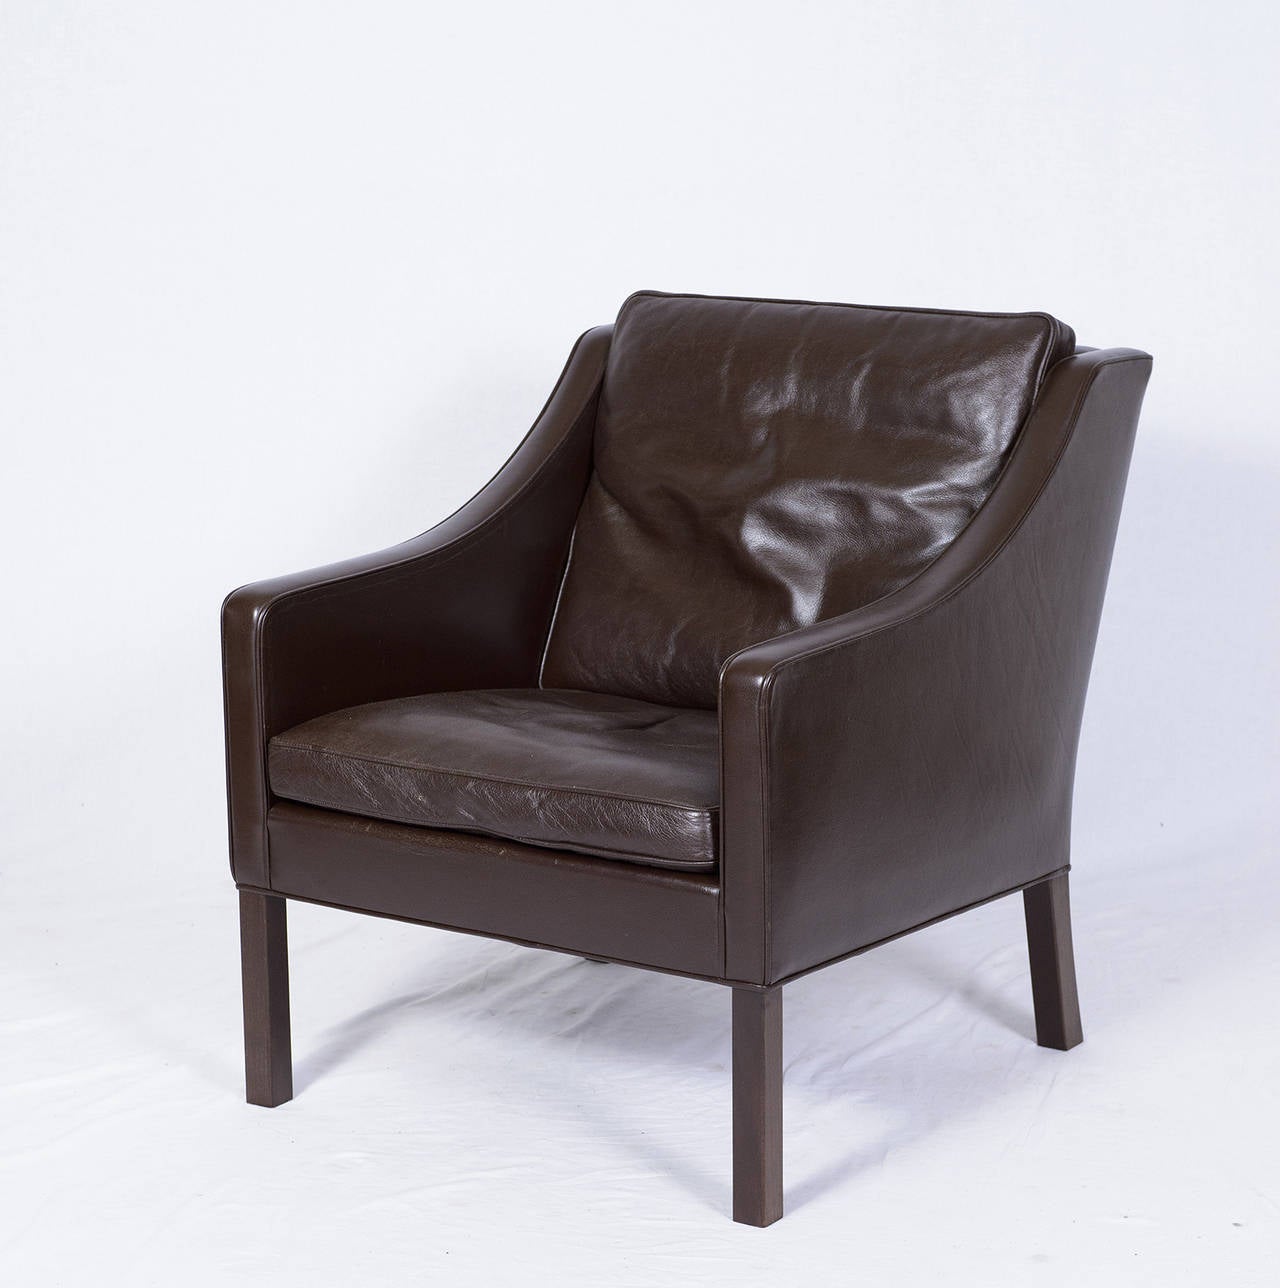 Borge Mogensen model #2207 leather lounge chair designed in 1963 and produced by Fredericia.    Store formerly known as ARTFUL DODGER INC